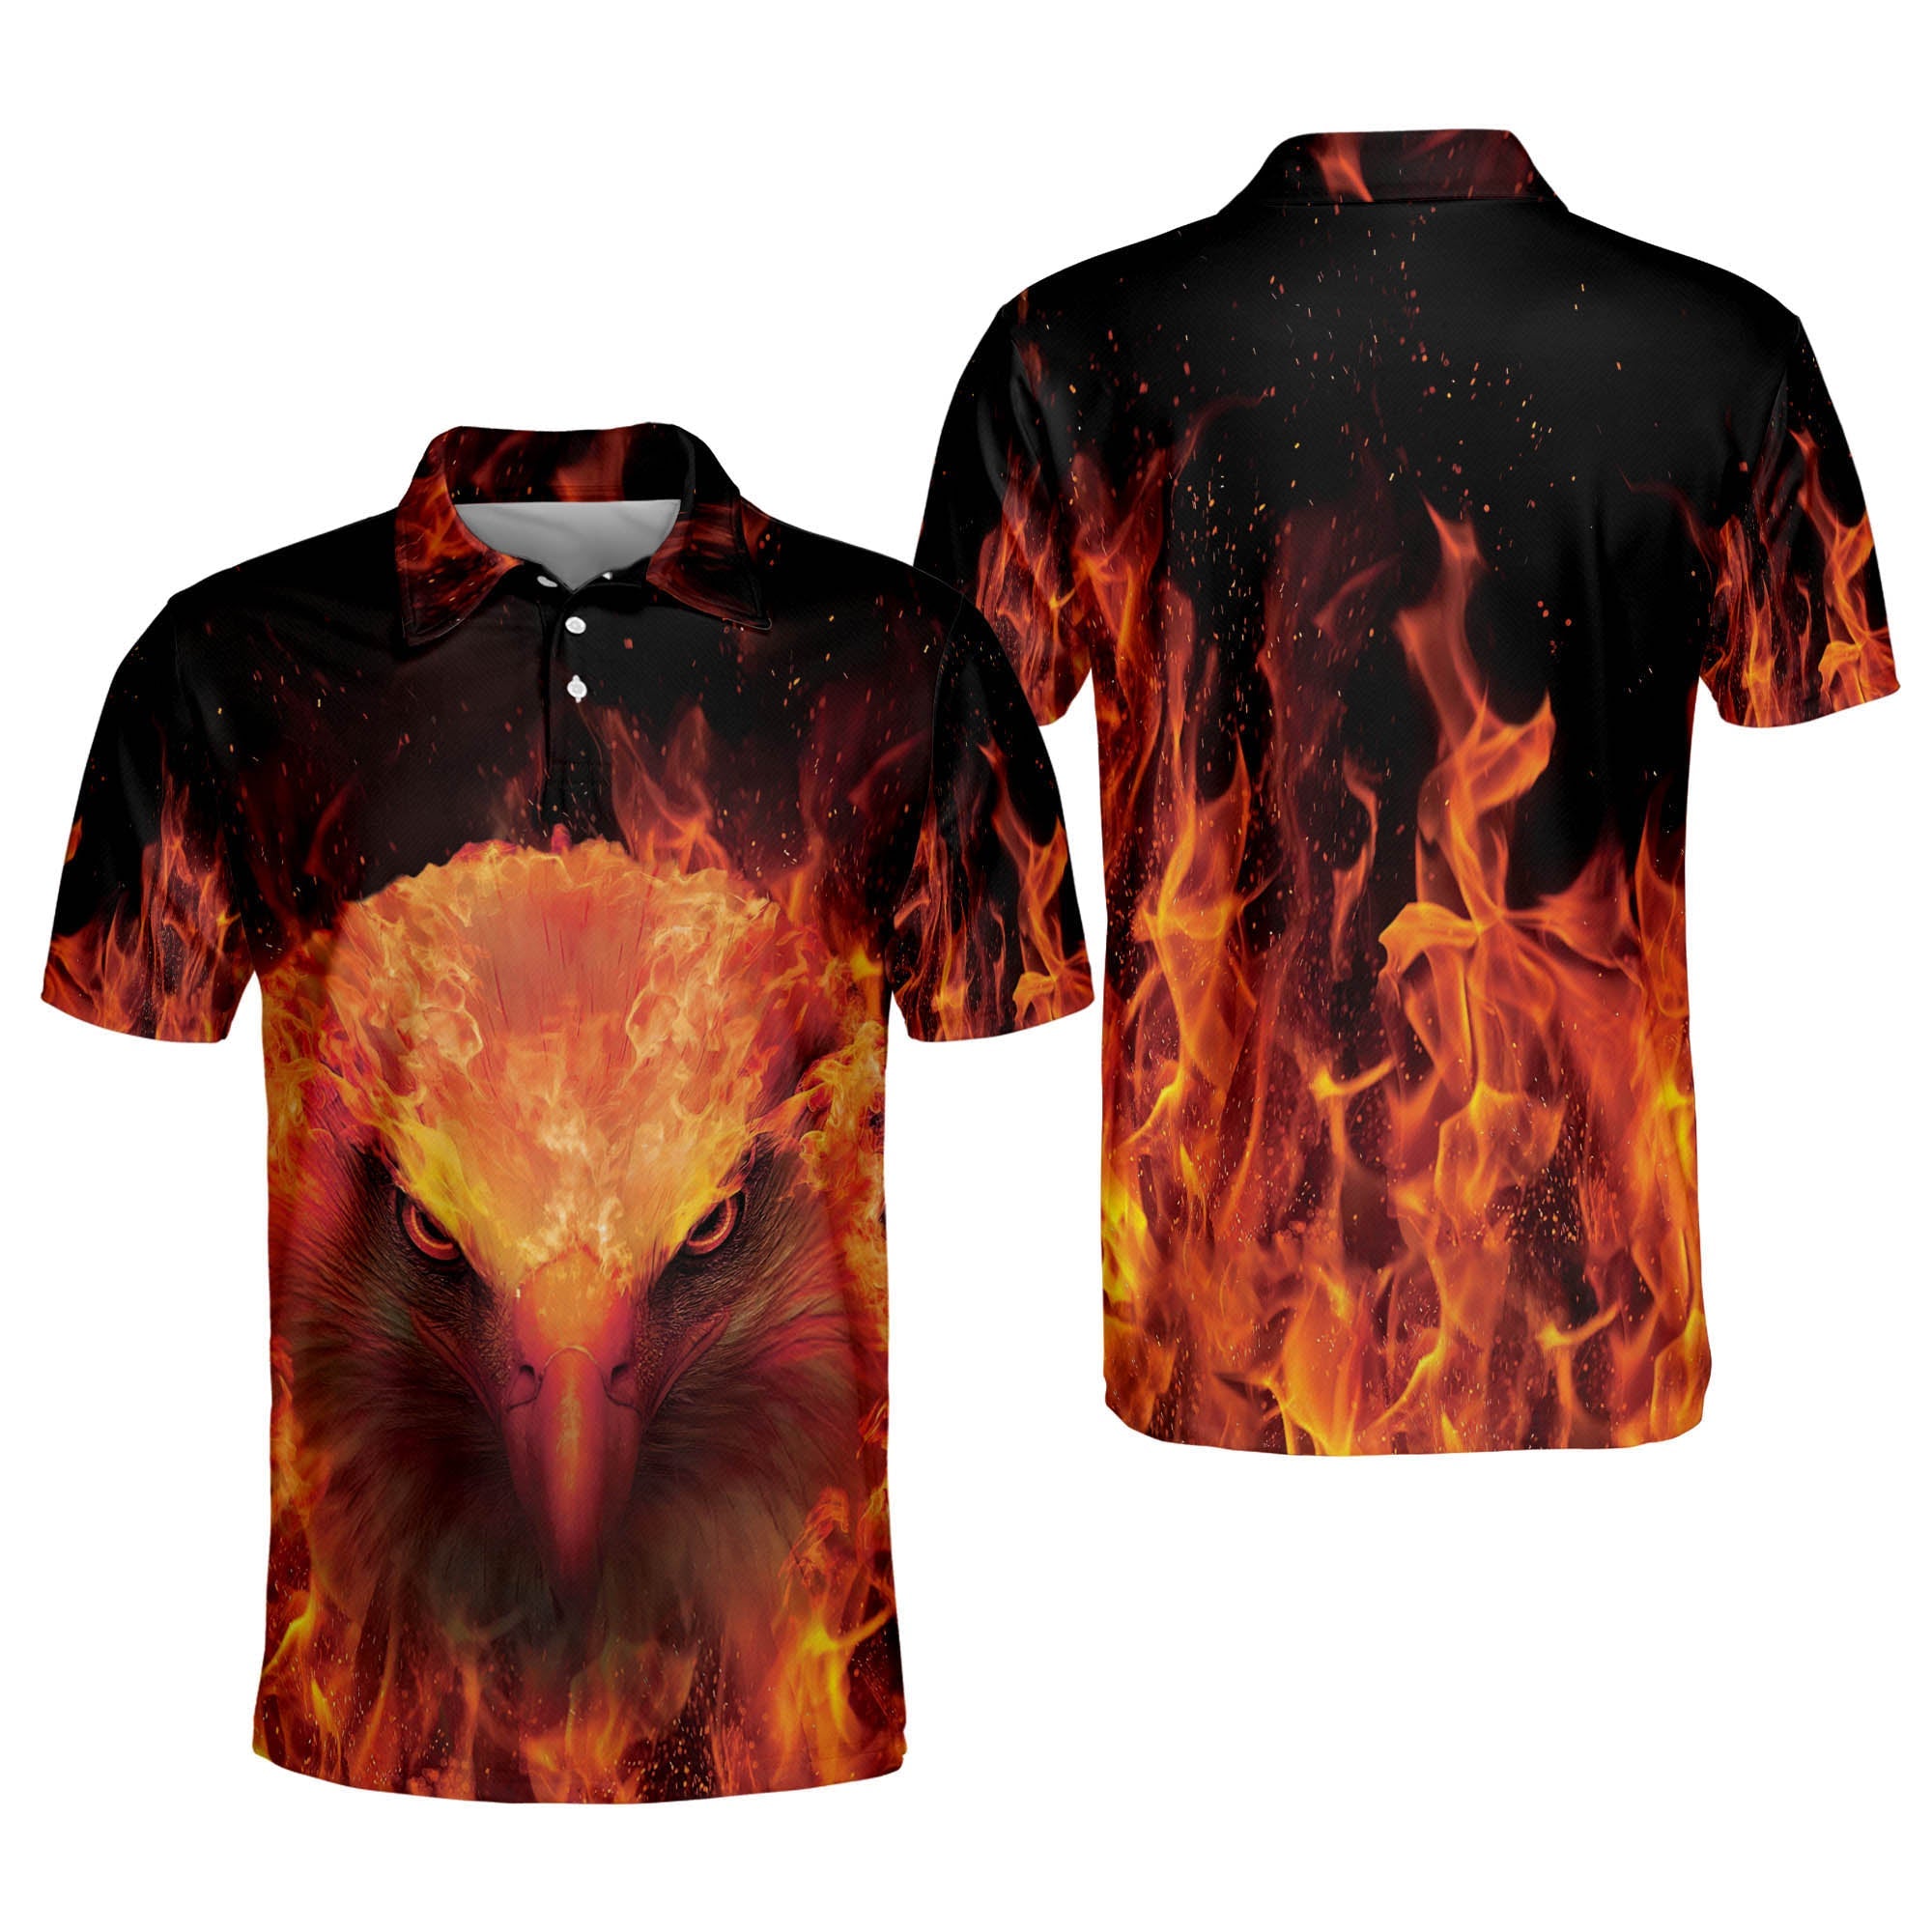 American Eagle Fiery Cool Polo Shirt/ Fire Pattern Full Printed Shirt/ Gift for Men